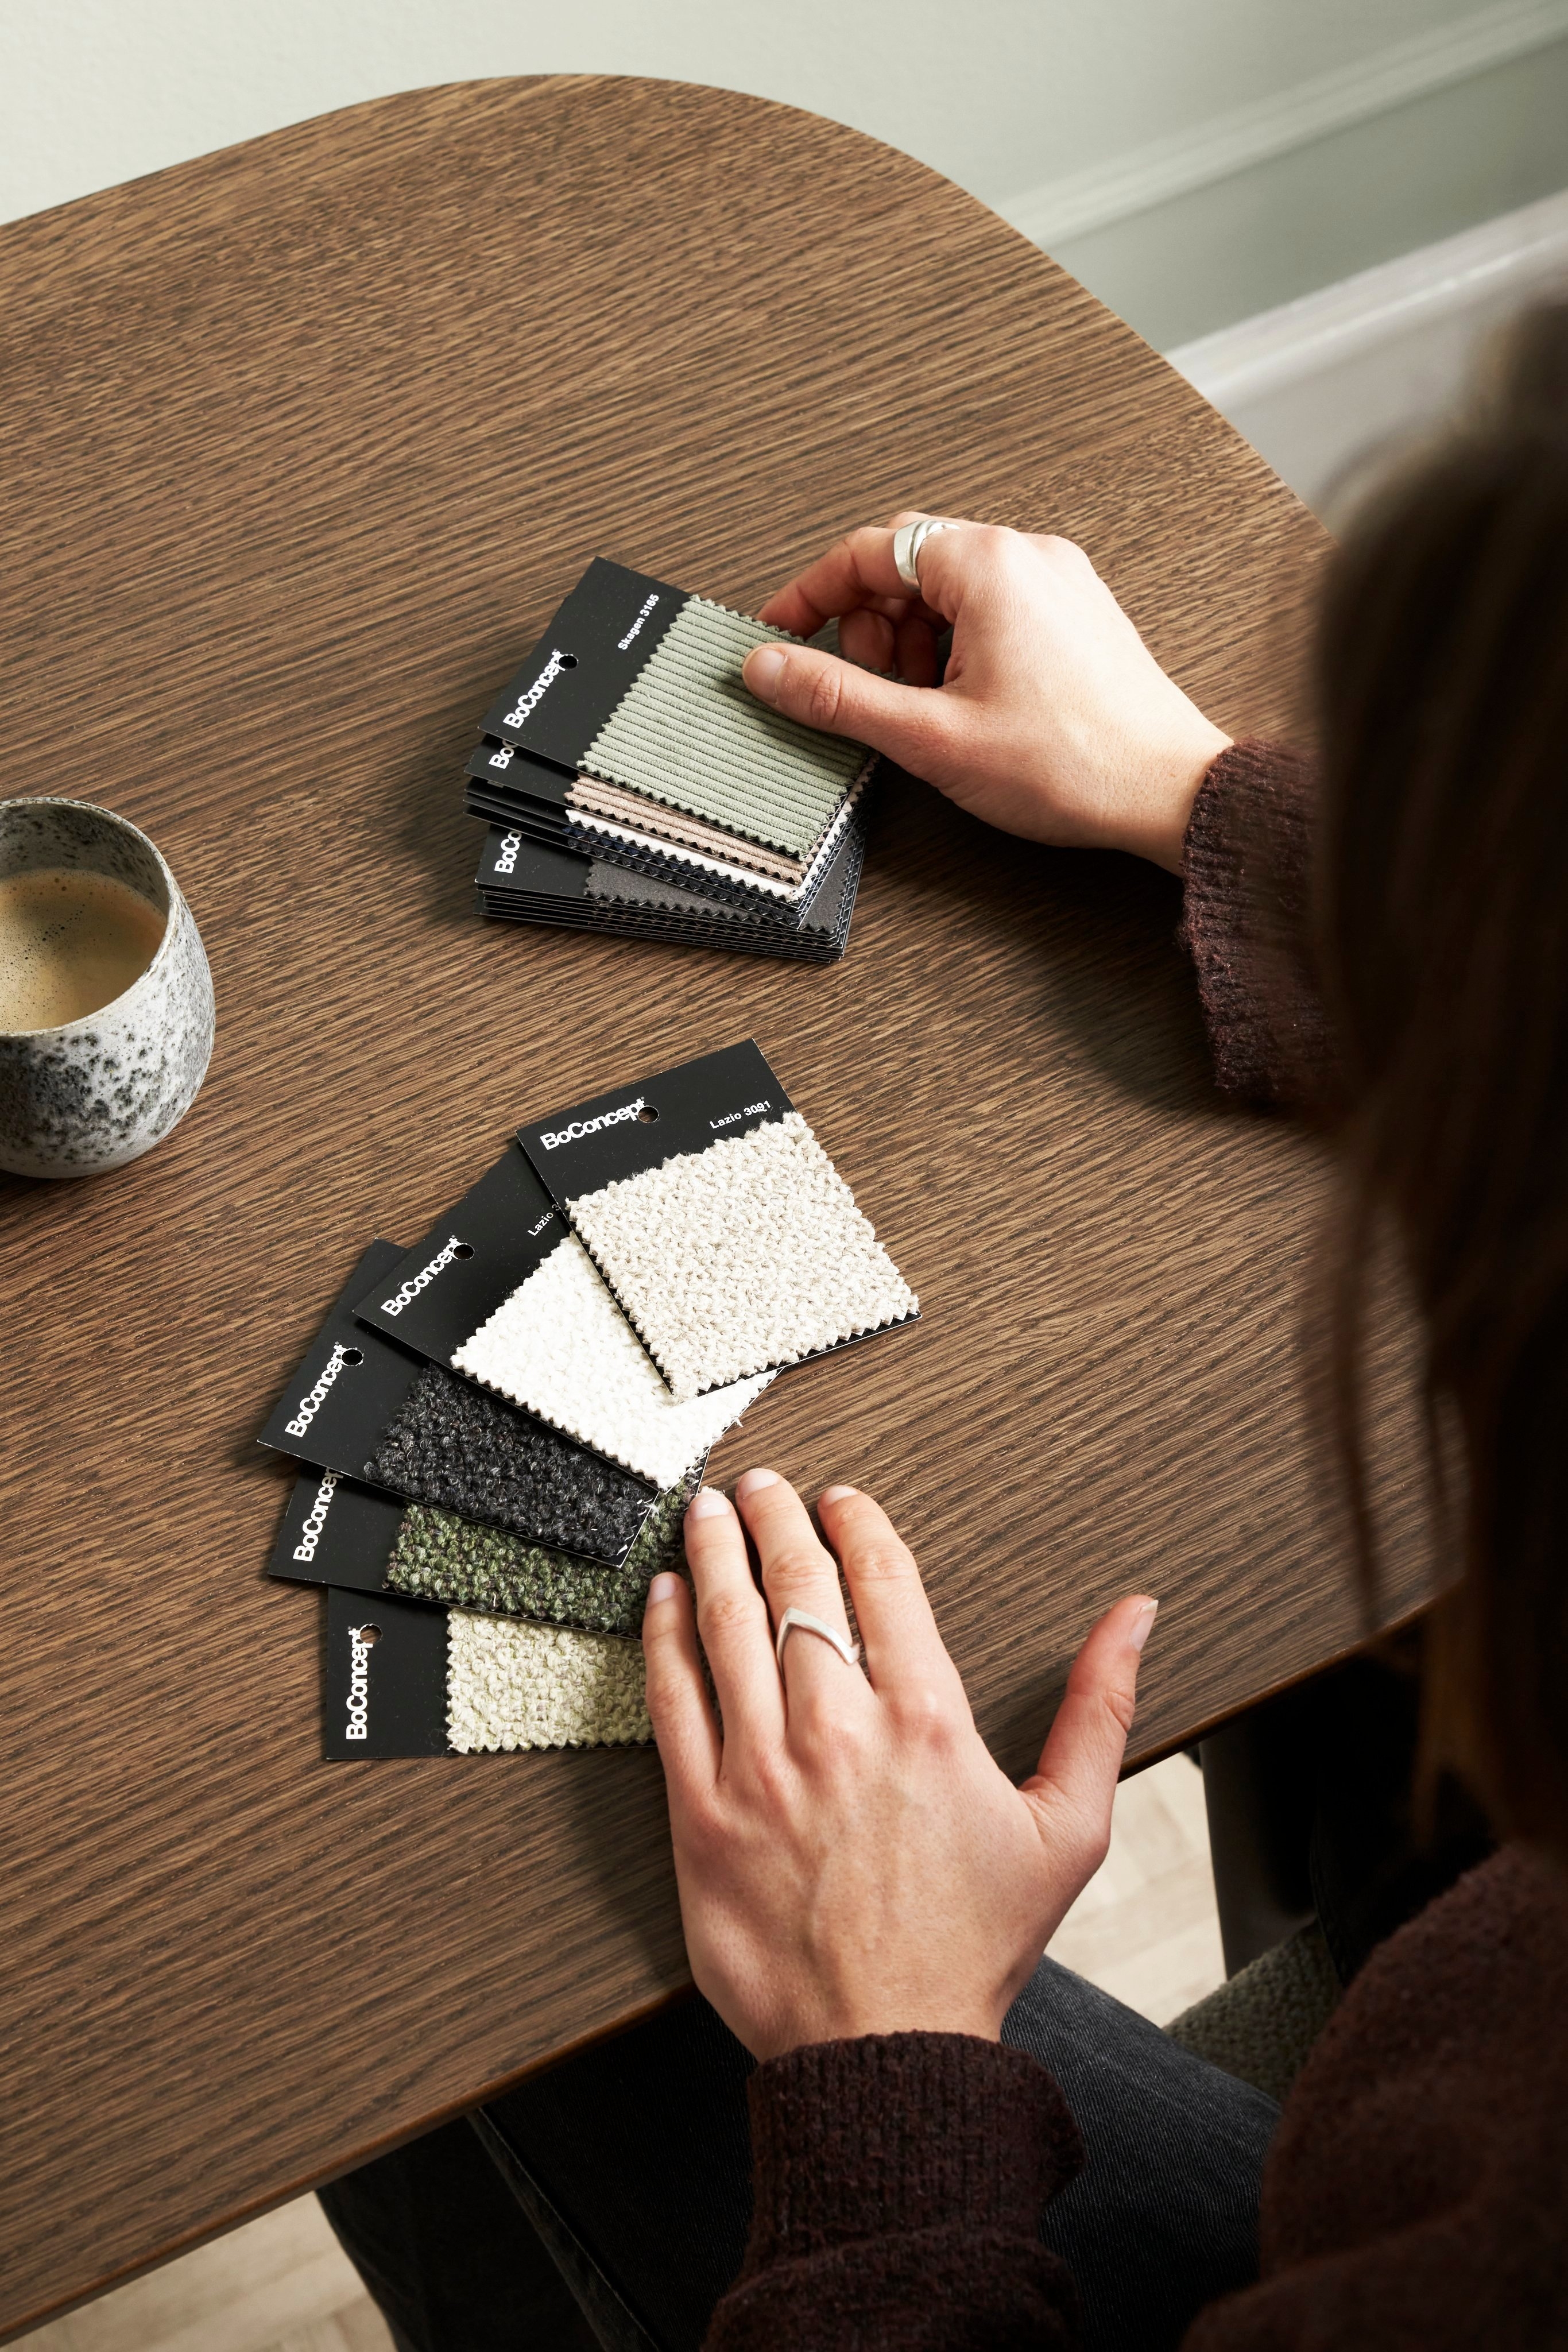 Person examining BoConcept fabric samples on a wooden table, next to a ceramic cup.